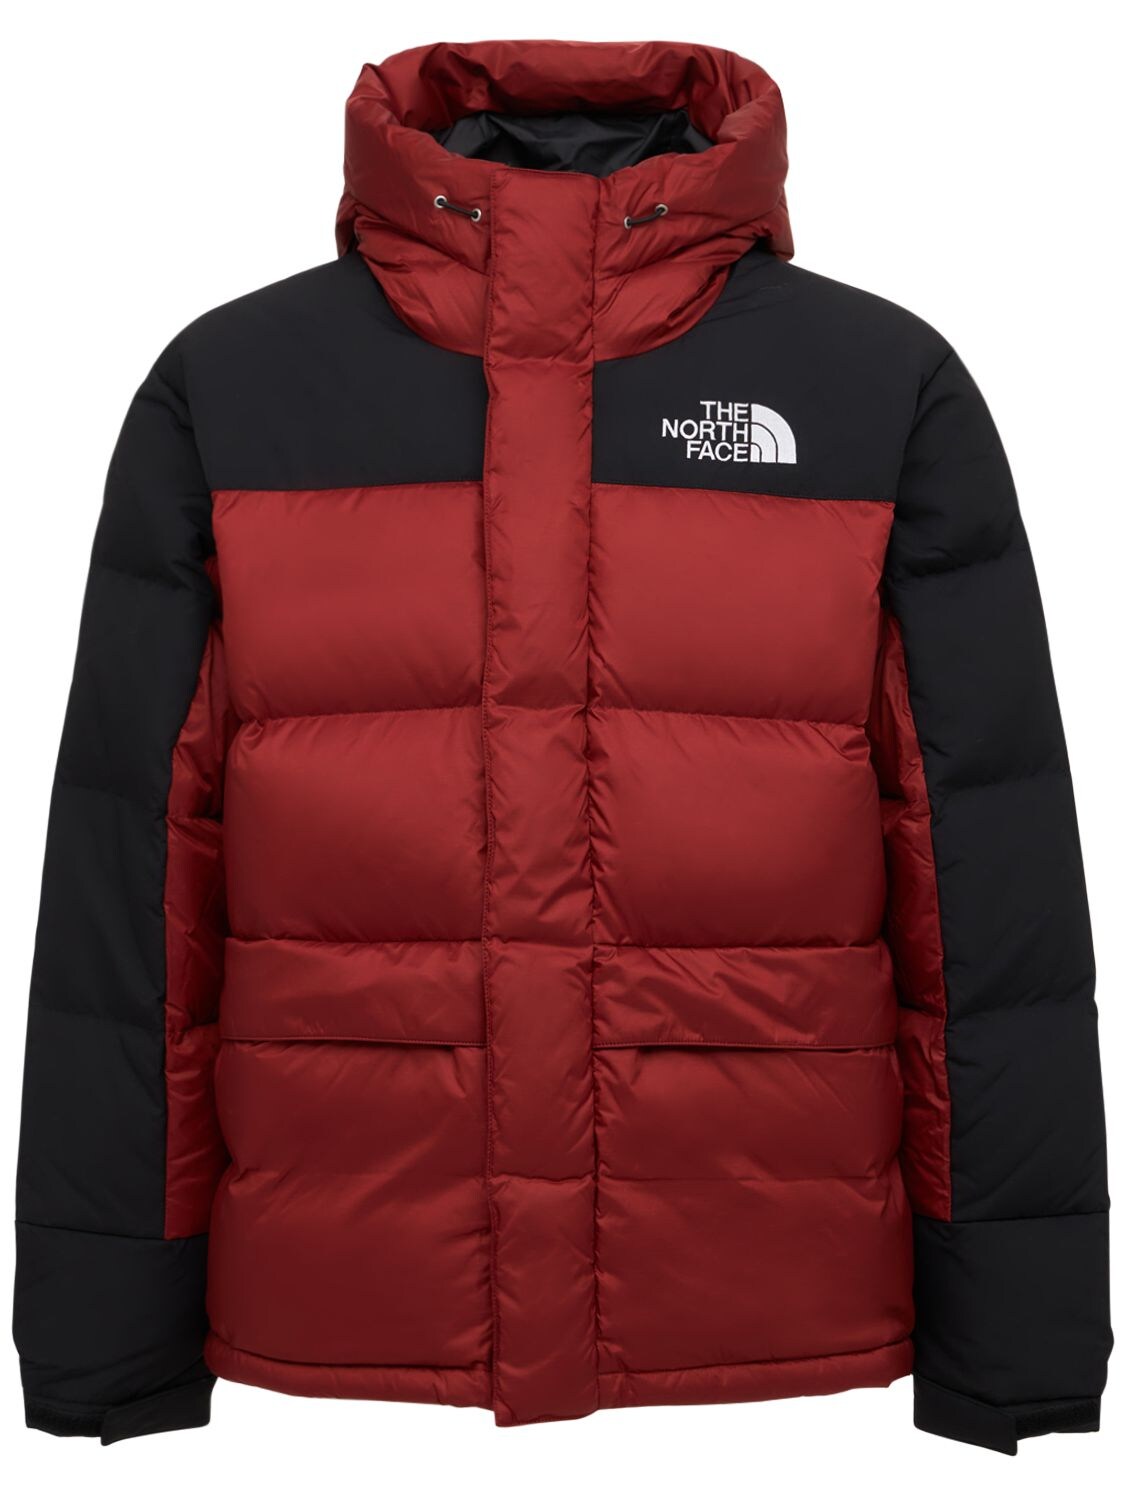 THE NORTH FACE HIMALAYAN HOODED DOWN PARKA,74I0D9008-QKRR0